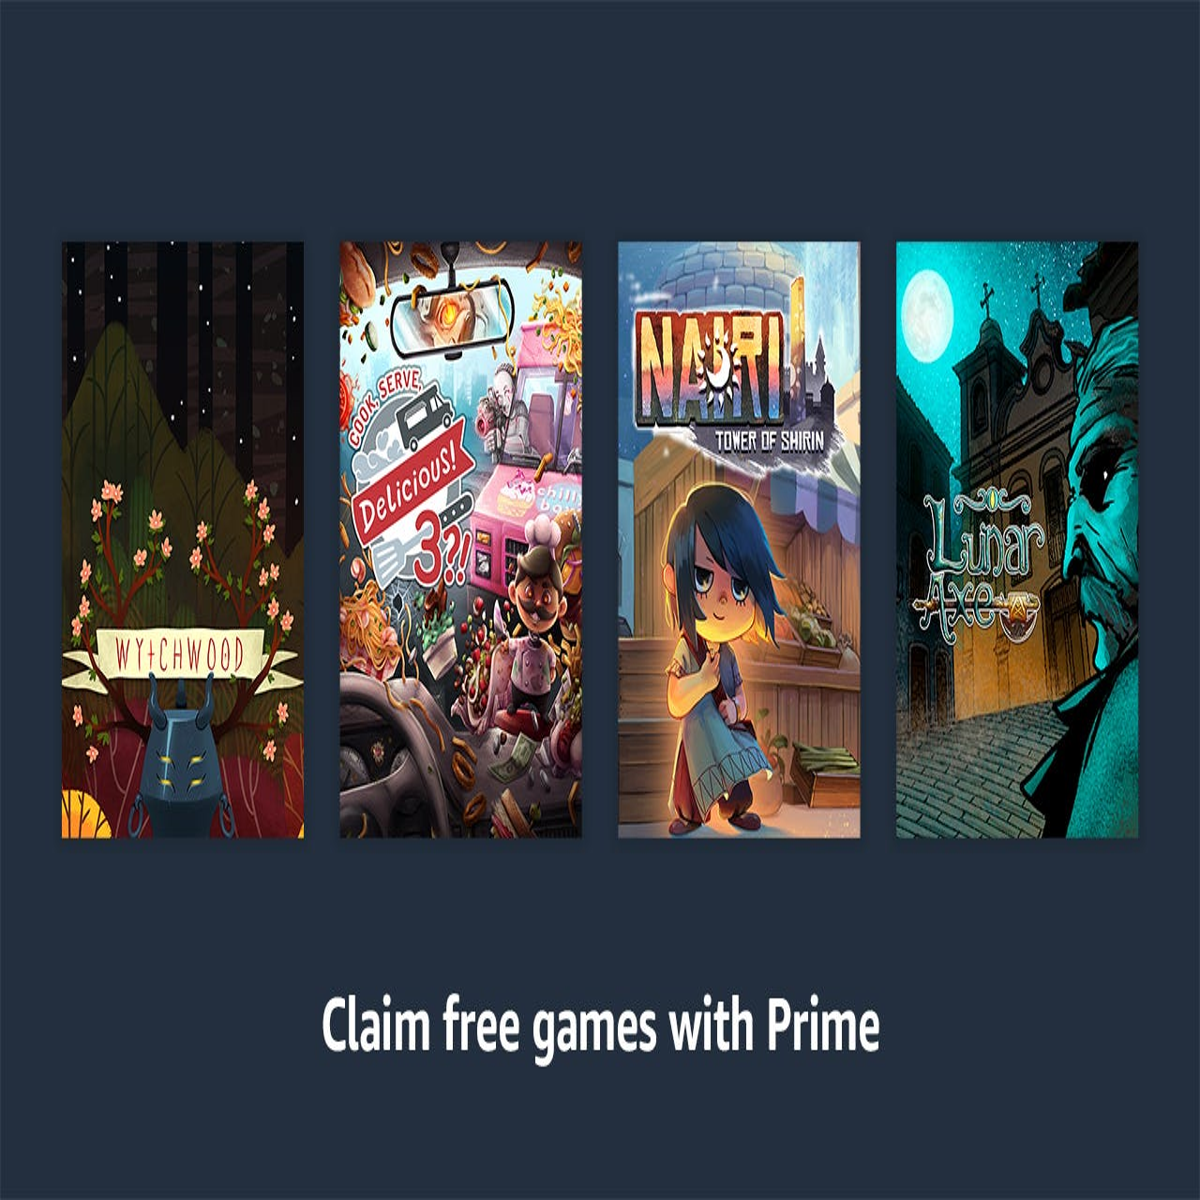 Prime's best kept secret - 33 games you can play for free